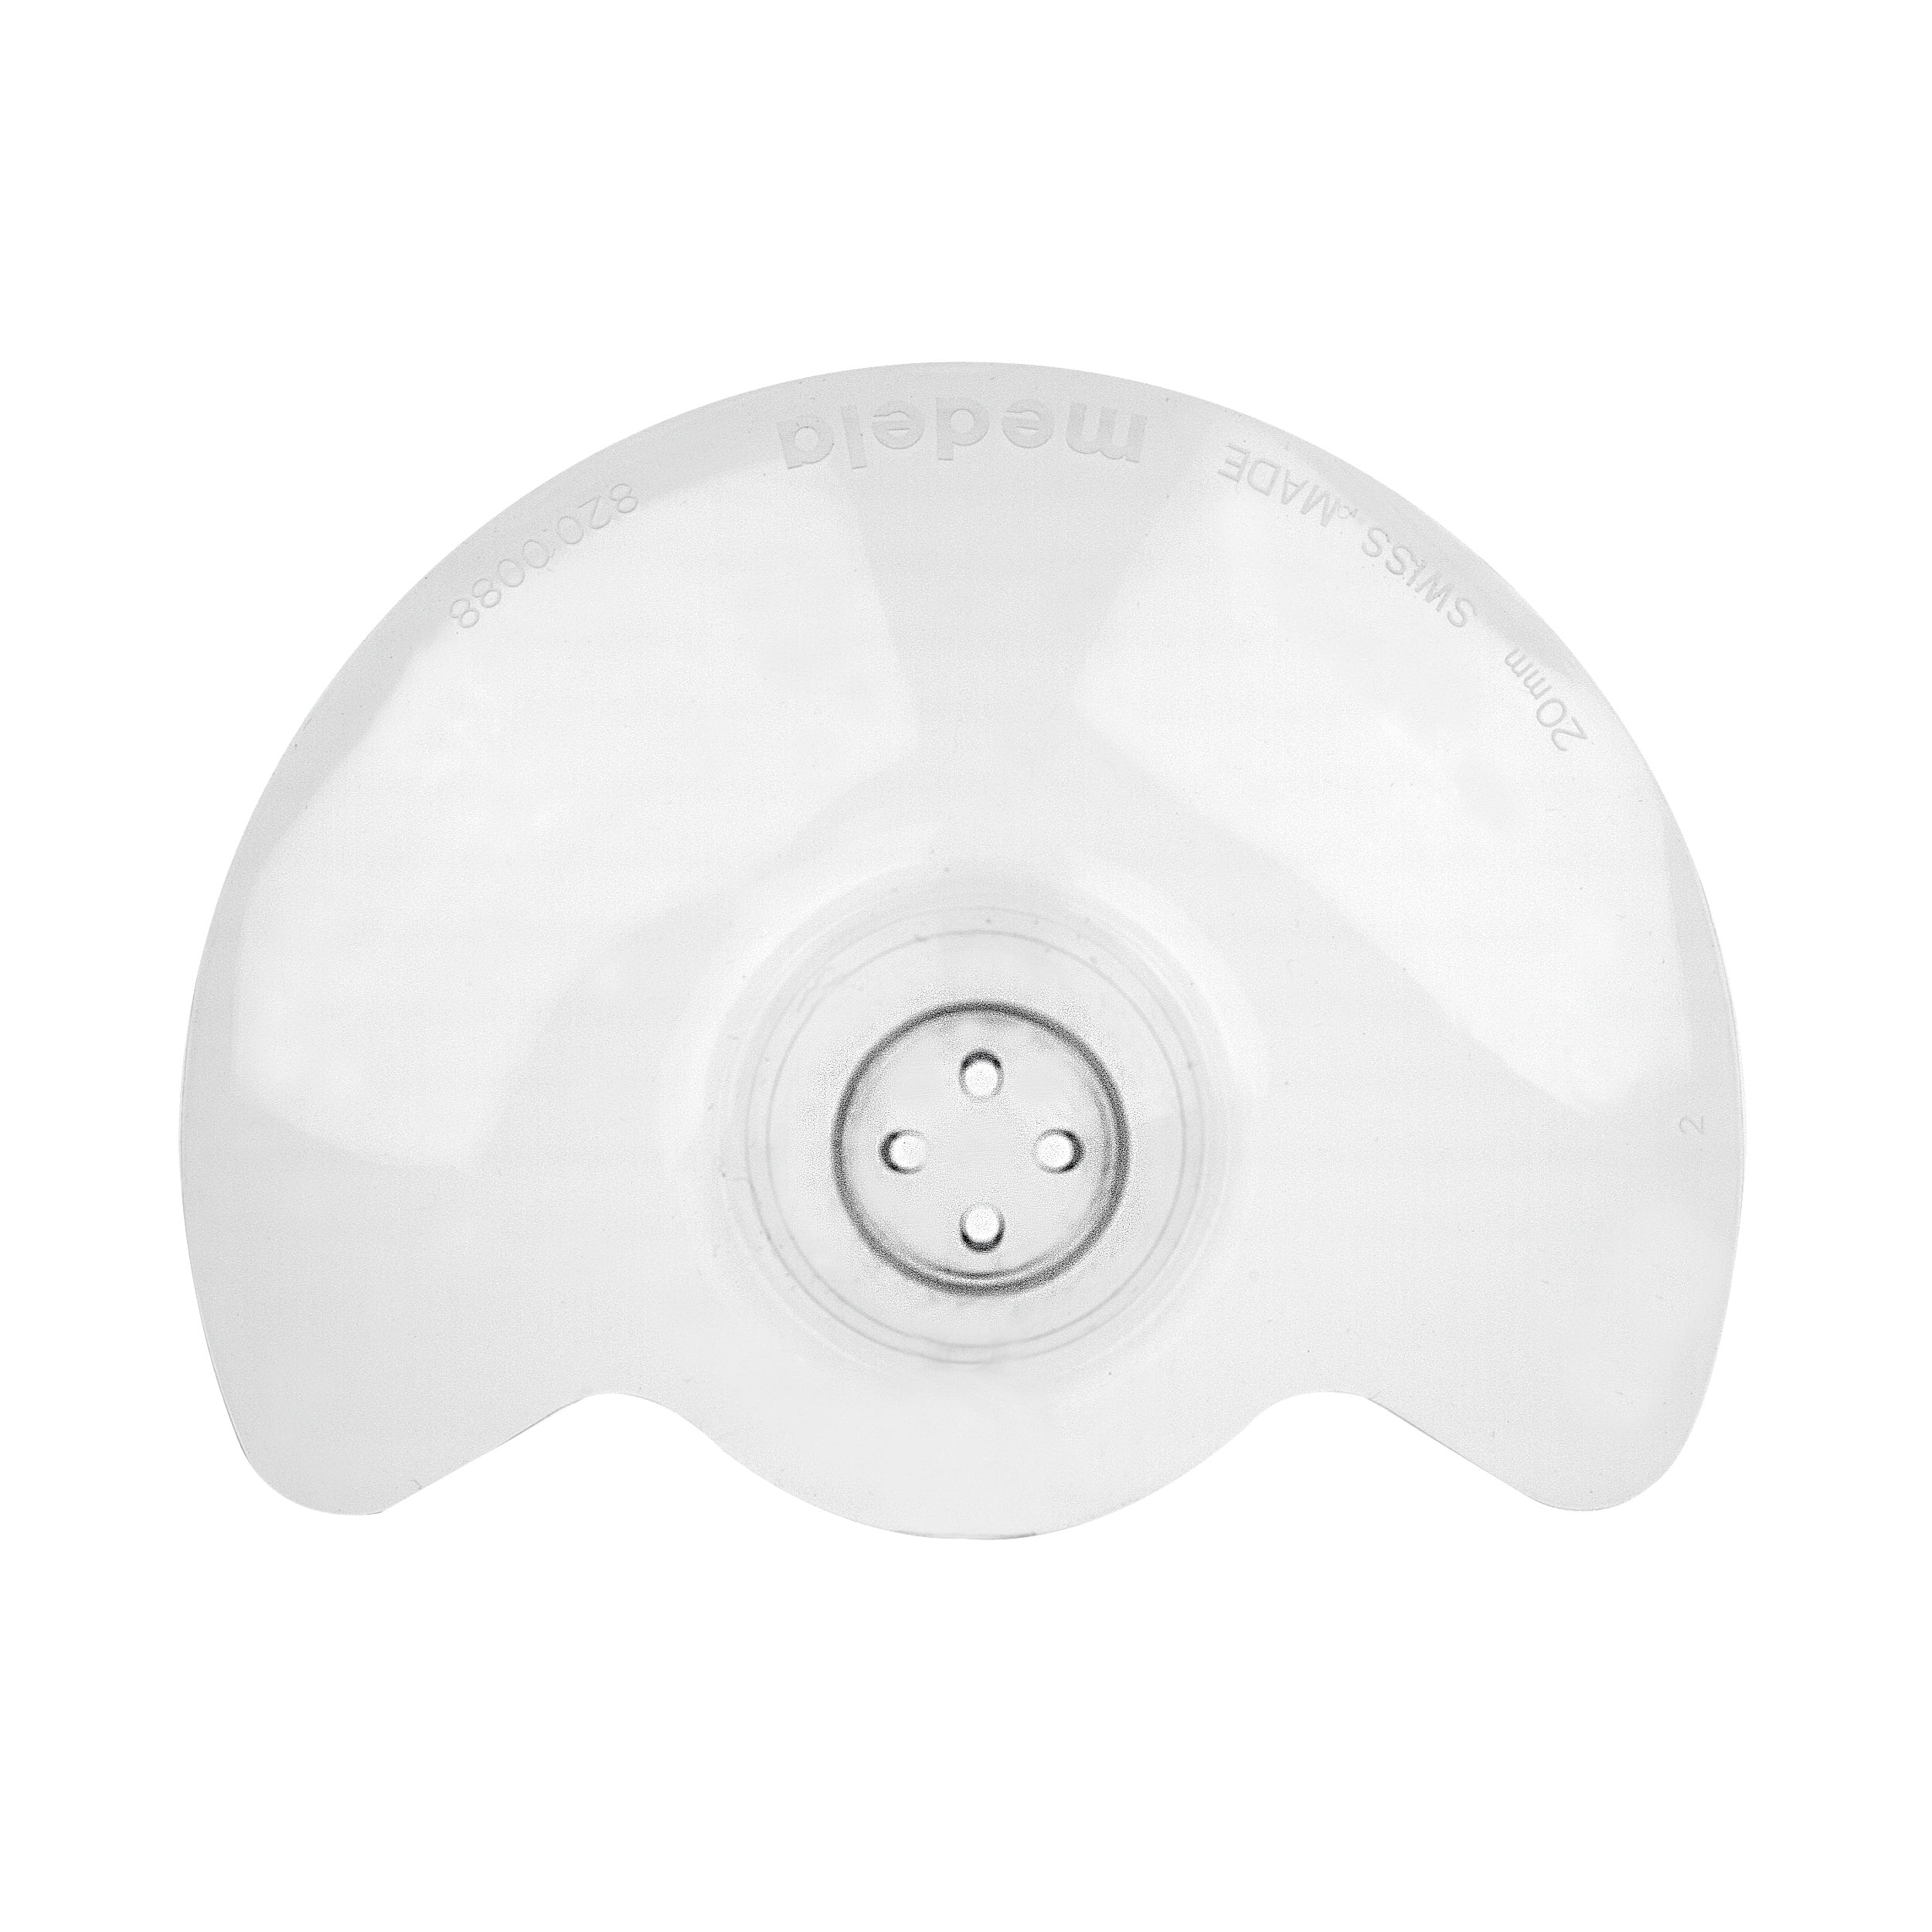 Medela Contact Nipple Shield for Breastfeeding, 24mm Medium Nippleshield,  For Latch Difficulties or Flat or Inverted Nipples, 2 Count with Carrying